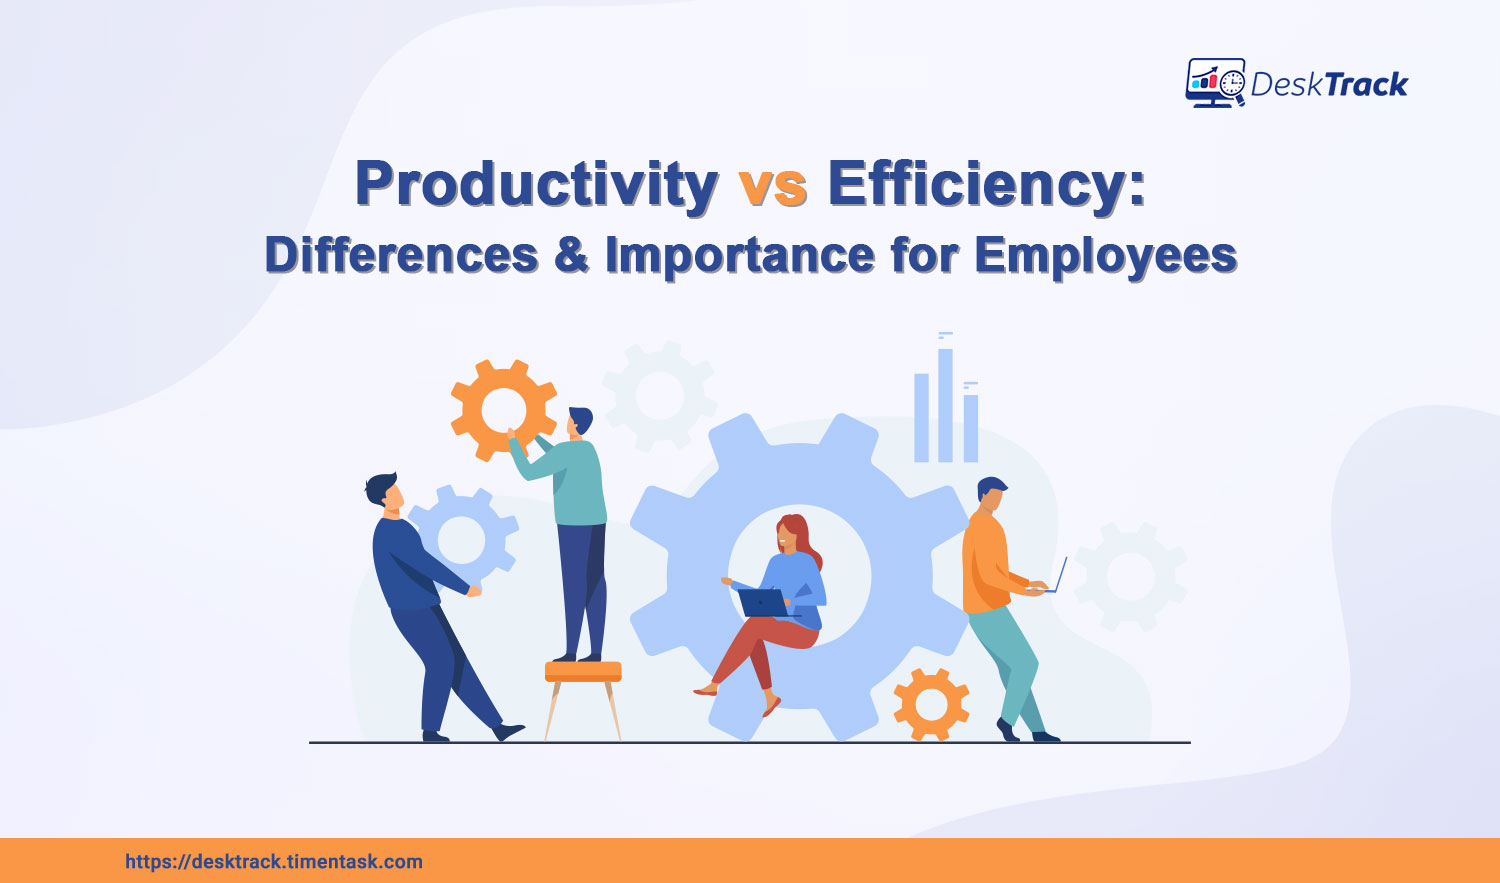 Productivity vs Efficiency: What is the Difference & Importance for Employees?